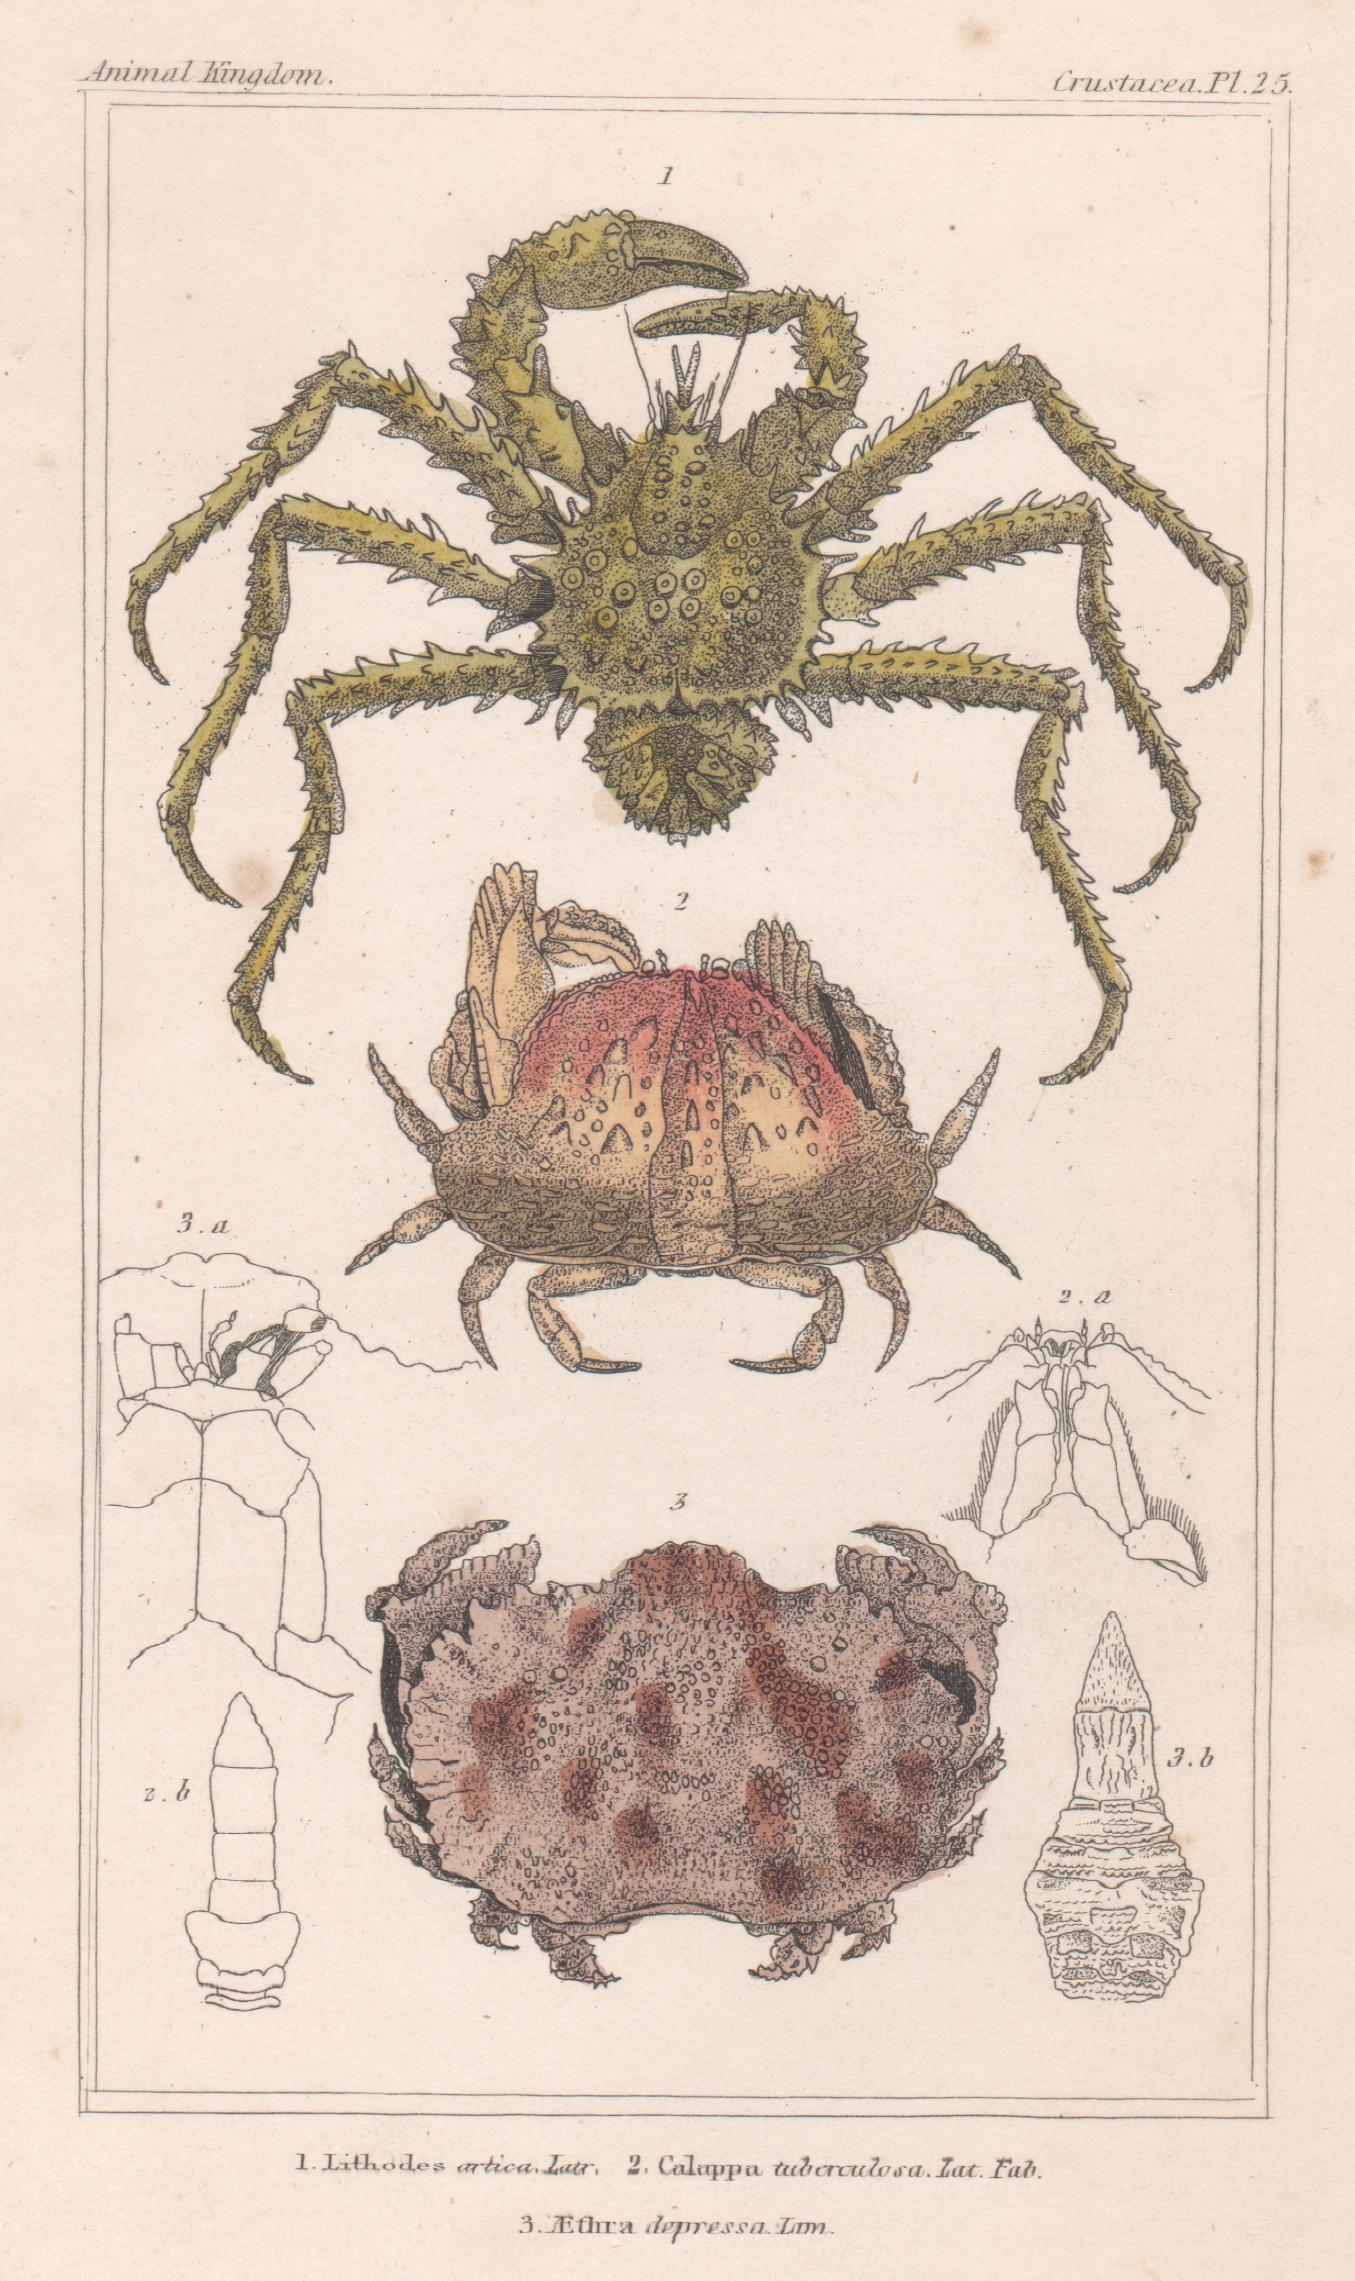 Crustaceans - crabs, antique English natural history engraving print, 1837